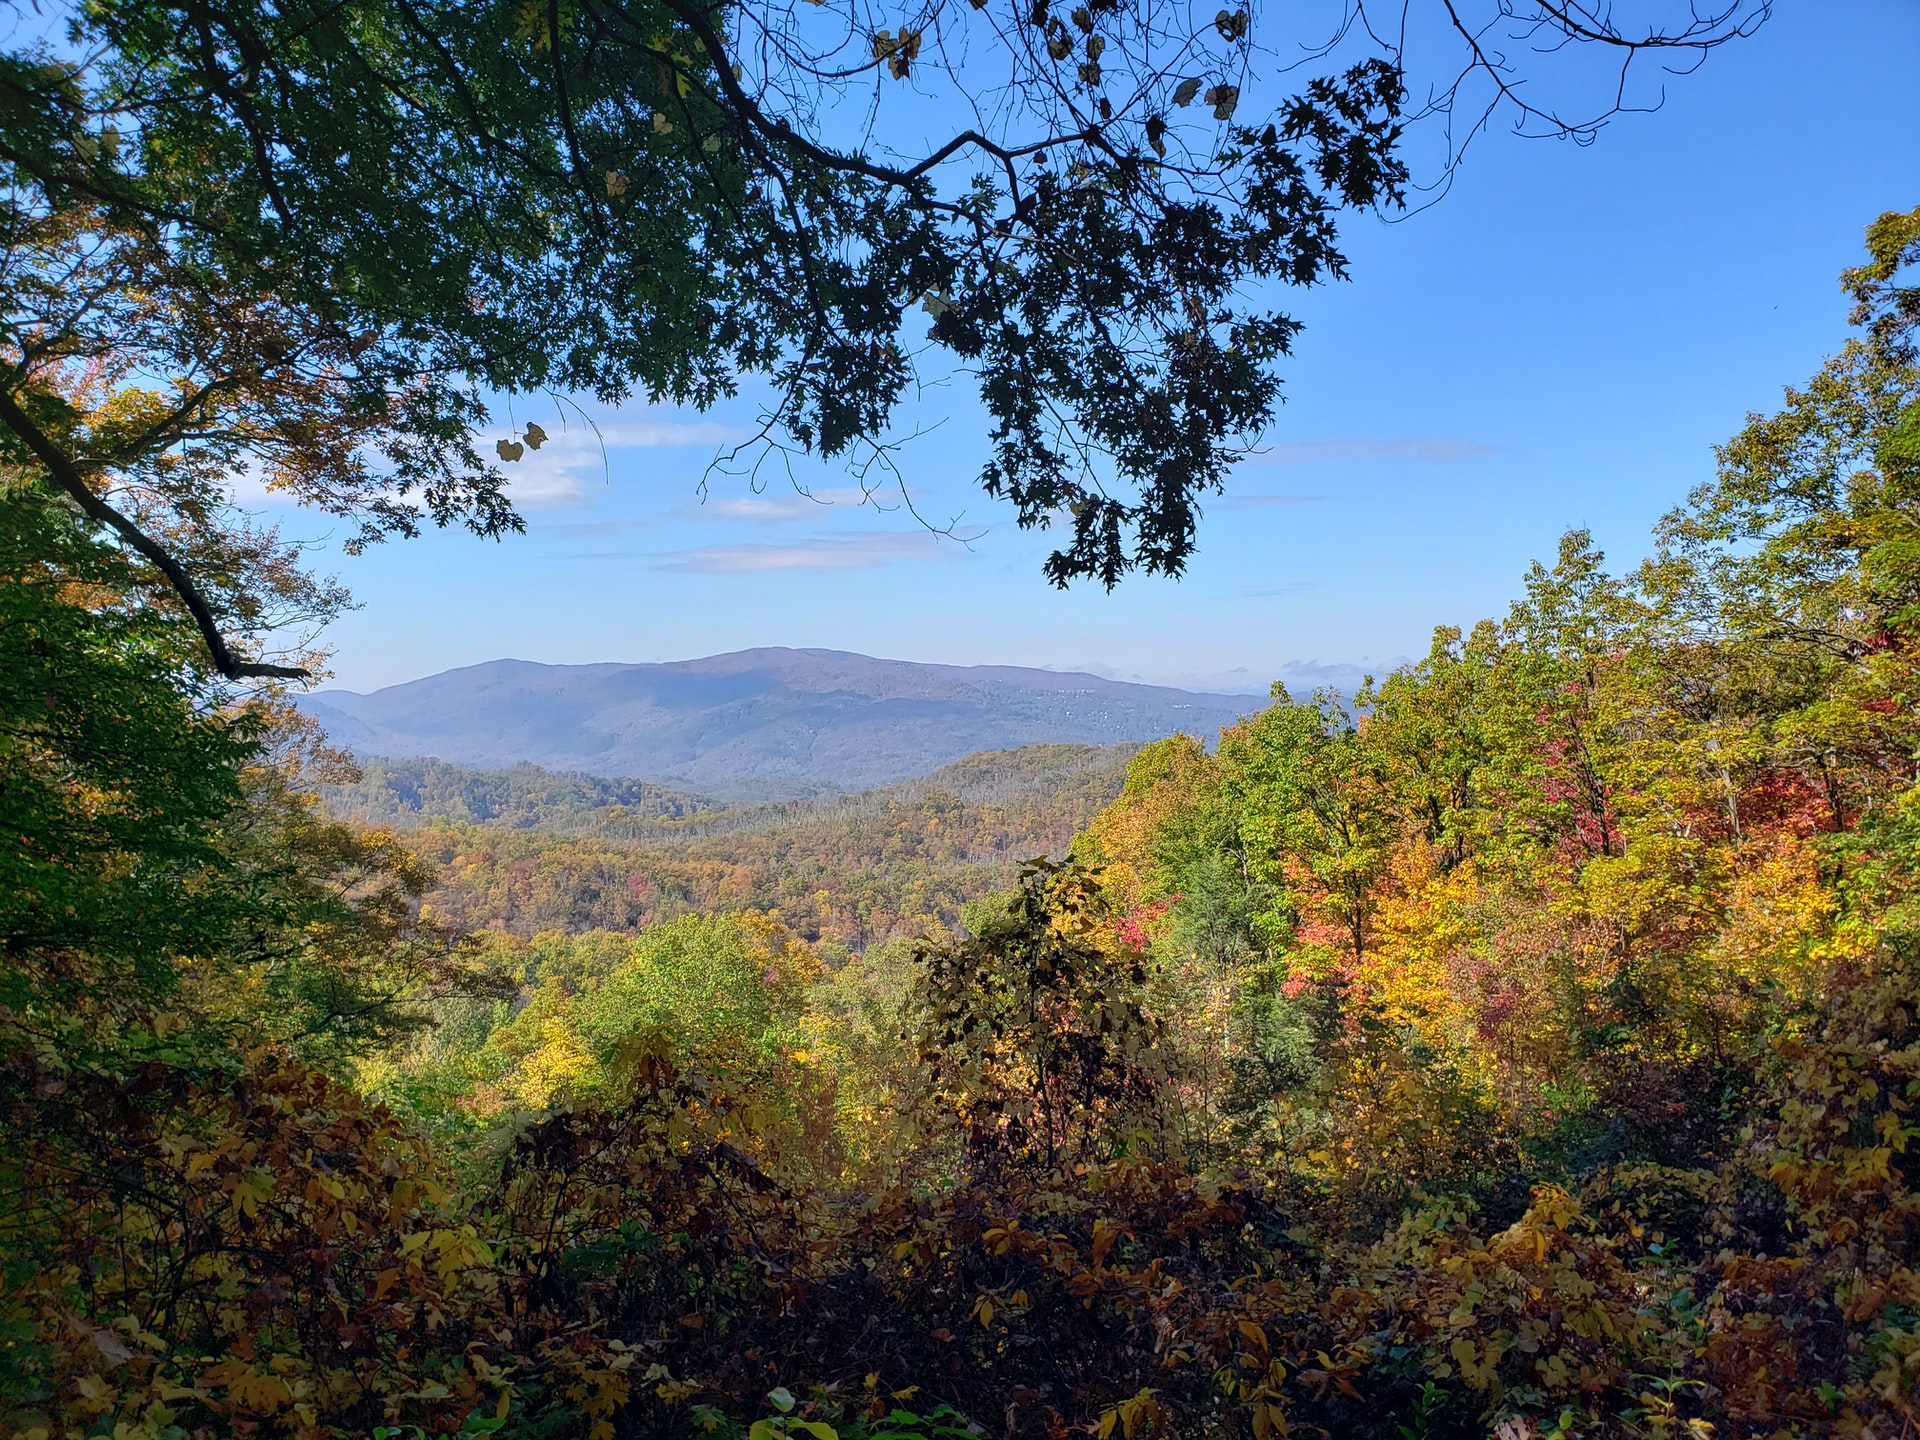 View from Roaring Fork Motor Nature Trail (photo: Angela Loria)